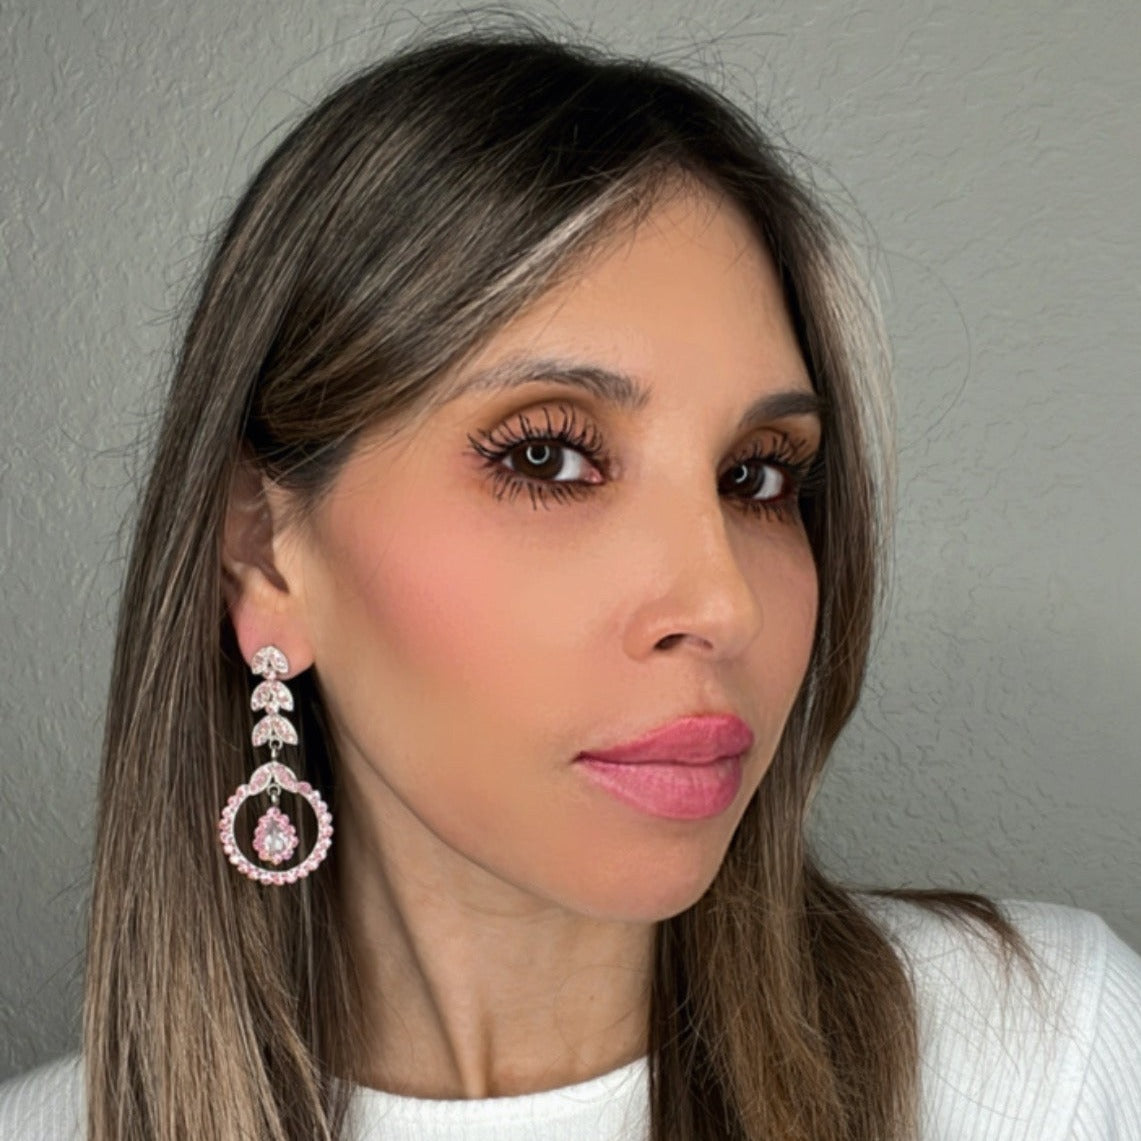 Pink Crystal Leaf Long Drop Earring - Born To Glam